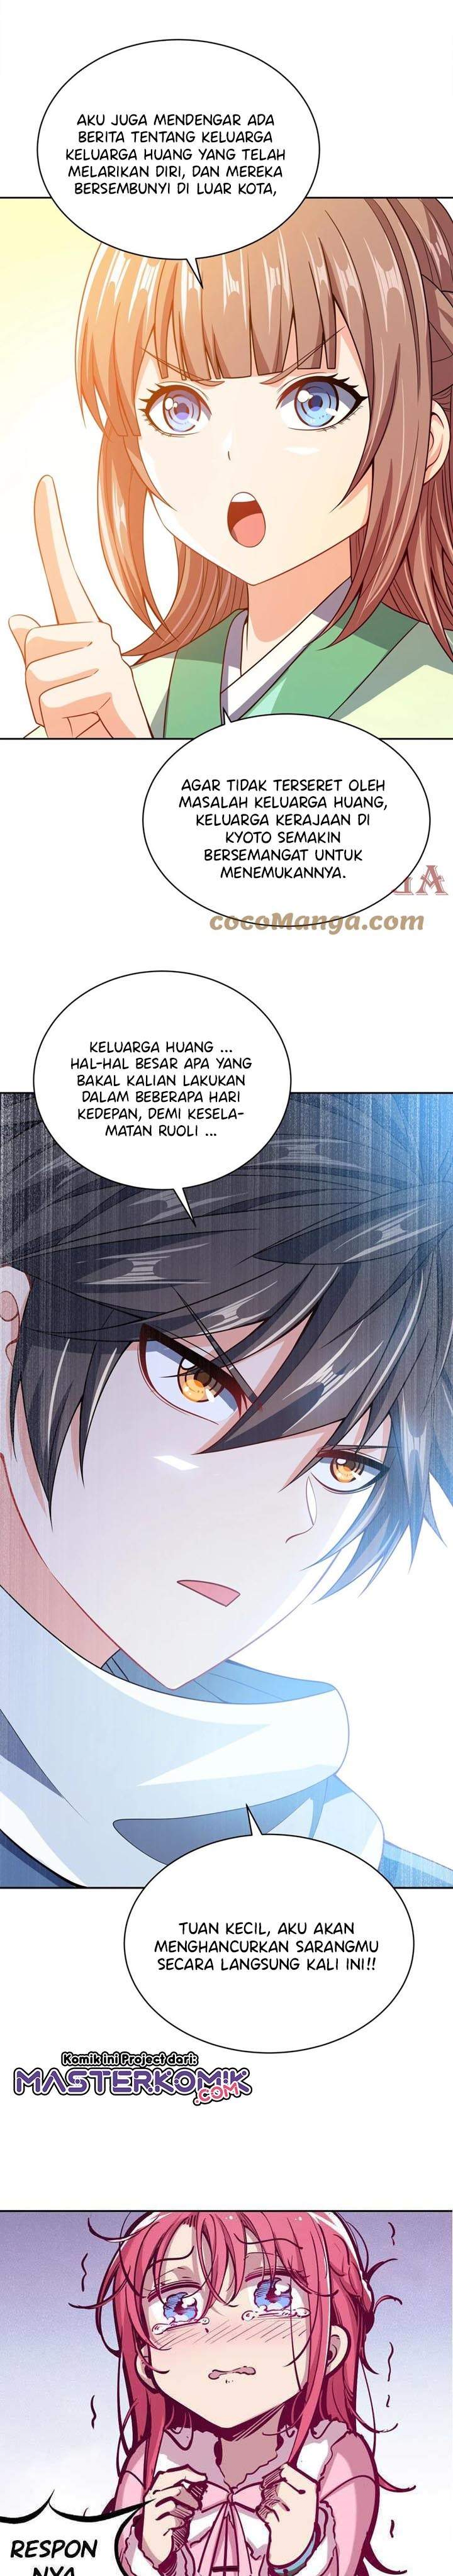 My Lady Is Actually the Empress? Chapter 37 Bahasa Indonesia